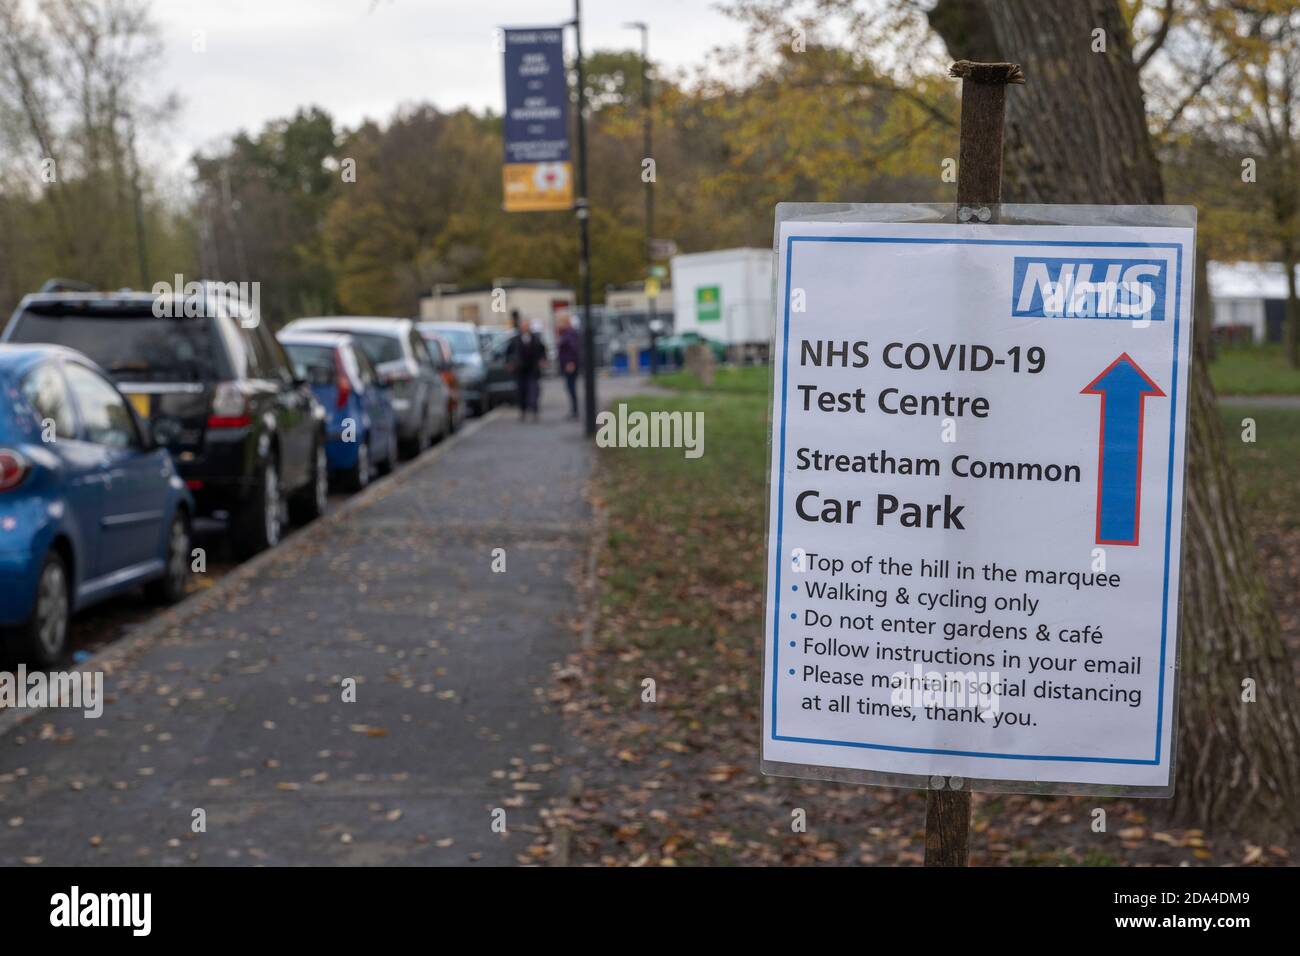 Streatham, London, England. 9th November 2020. A NHS Covid-19 test centre car park sign on Streatham Common in South London in the United Kingdom. (photo by Sam Mellish / Alamy Live News) Stock Photo